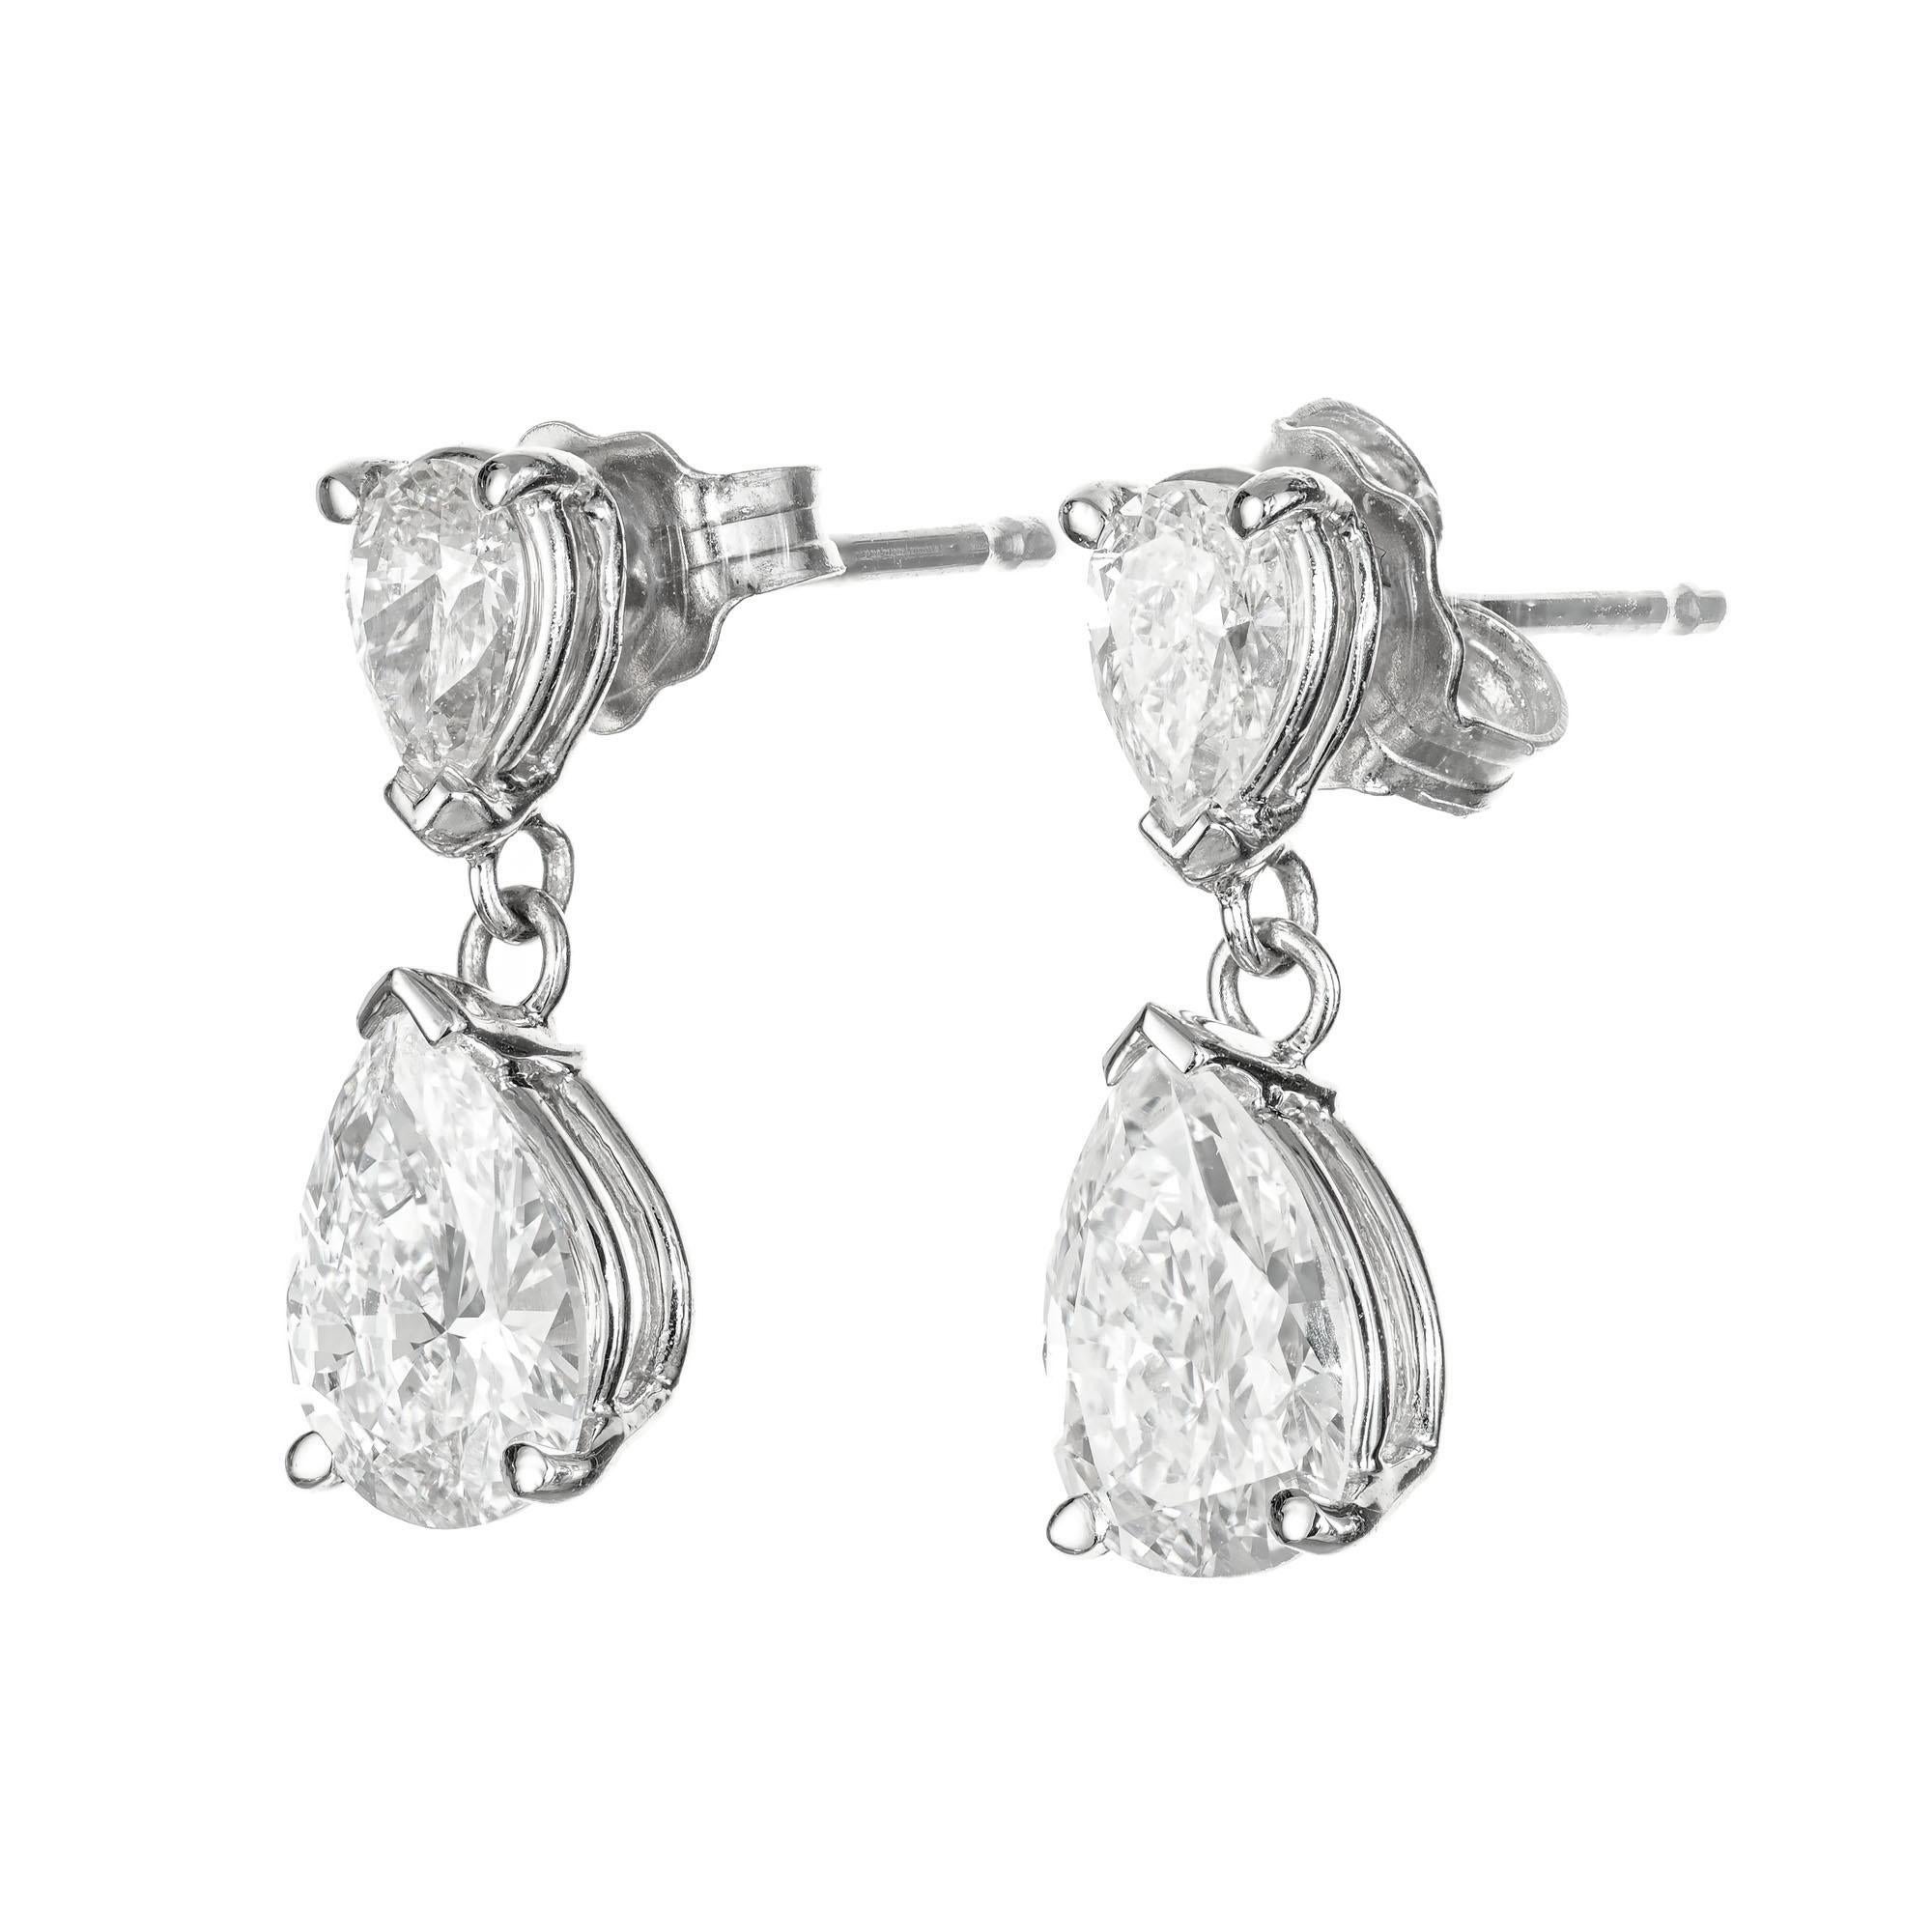 1960's pear shaped diamond dangle earrings. 2 GIA certified pear shaped dangles with 2 pear shaped tops in a platinum settings. Designed and crafted in the Peter Suchy workshop.

1 pear shape diamond, D SI approx. .57cts GIA certificate #